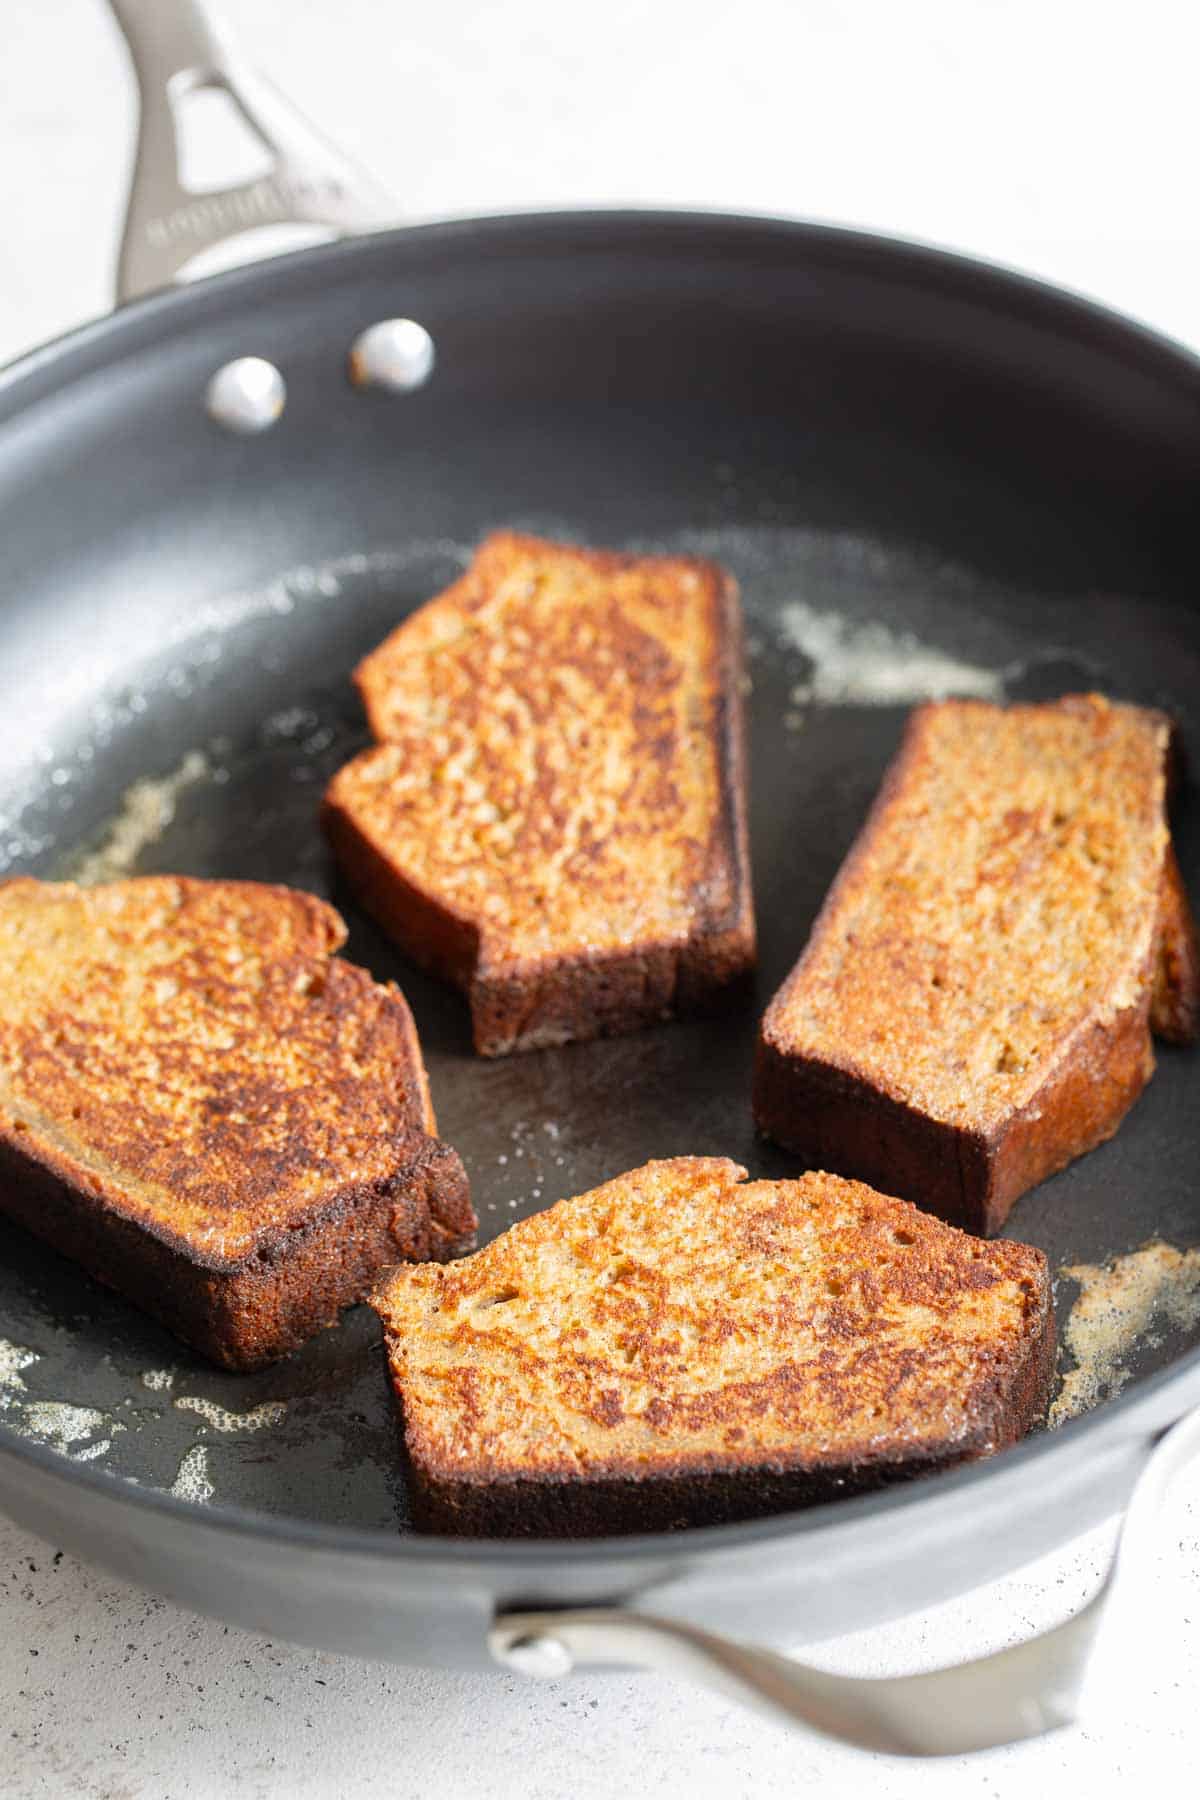 French toast being fried in a skillet.